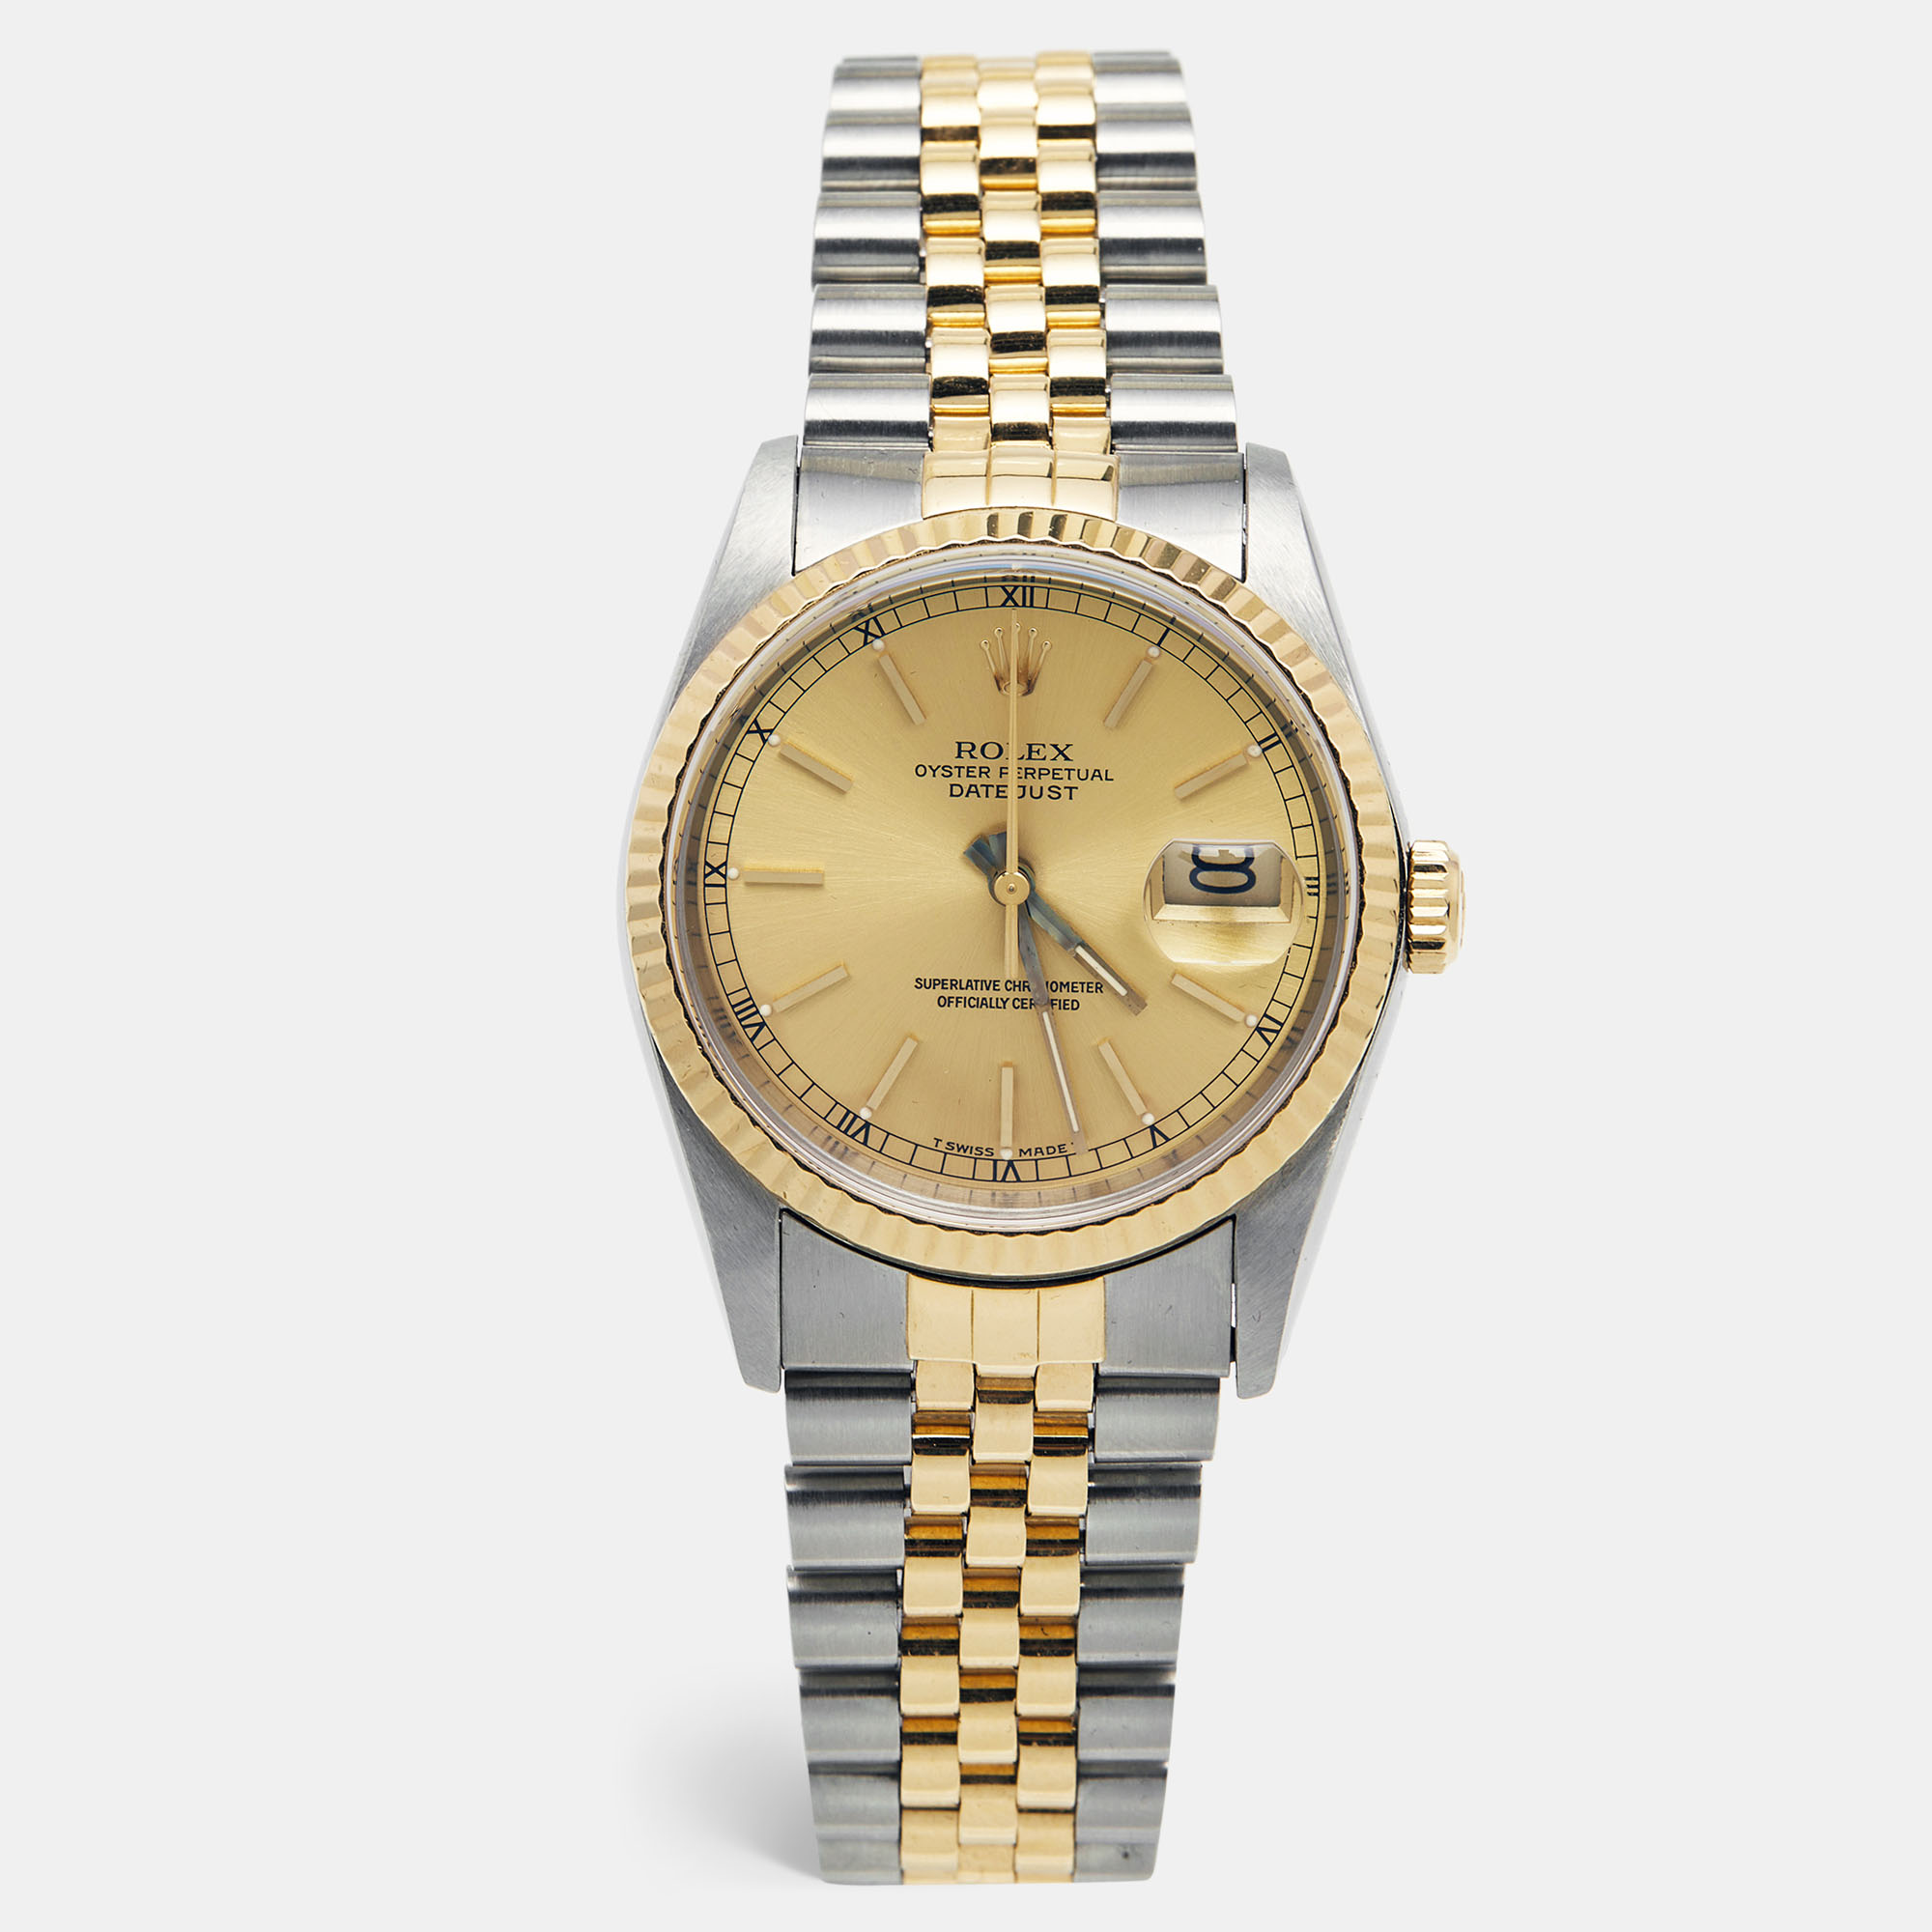 The Datejust is one of the most recognized and coveted watches from the house of Rolex. It has a distinct look and an irrefutable appeal. Crafted in stainless steel and 18k yellow gold this vintage Rolex Datejust wristwatch has the signature allure.